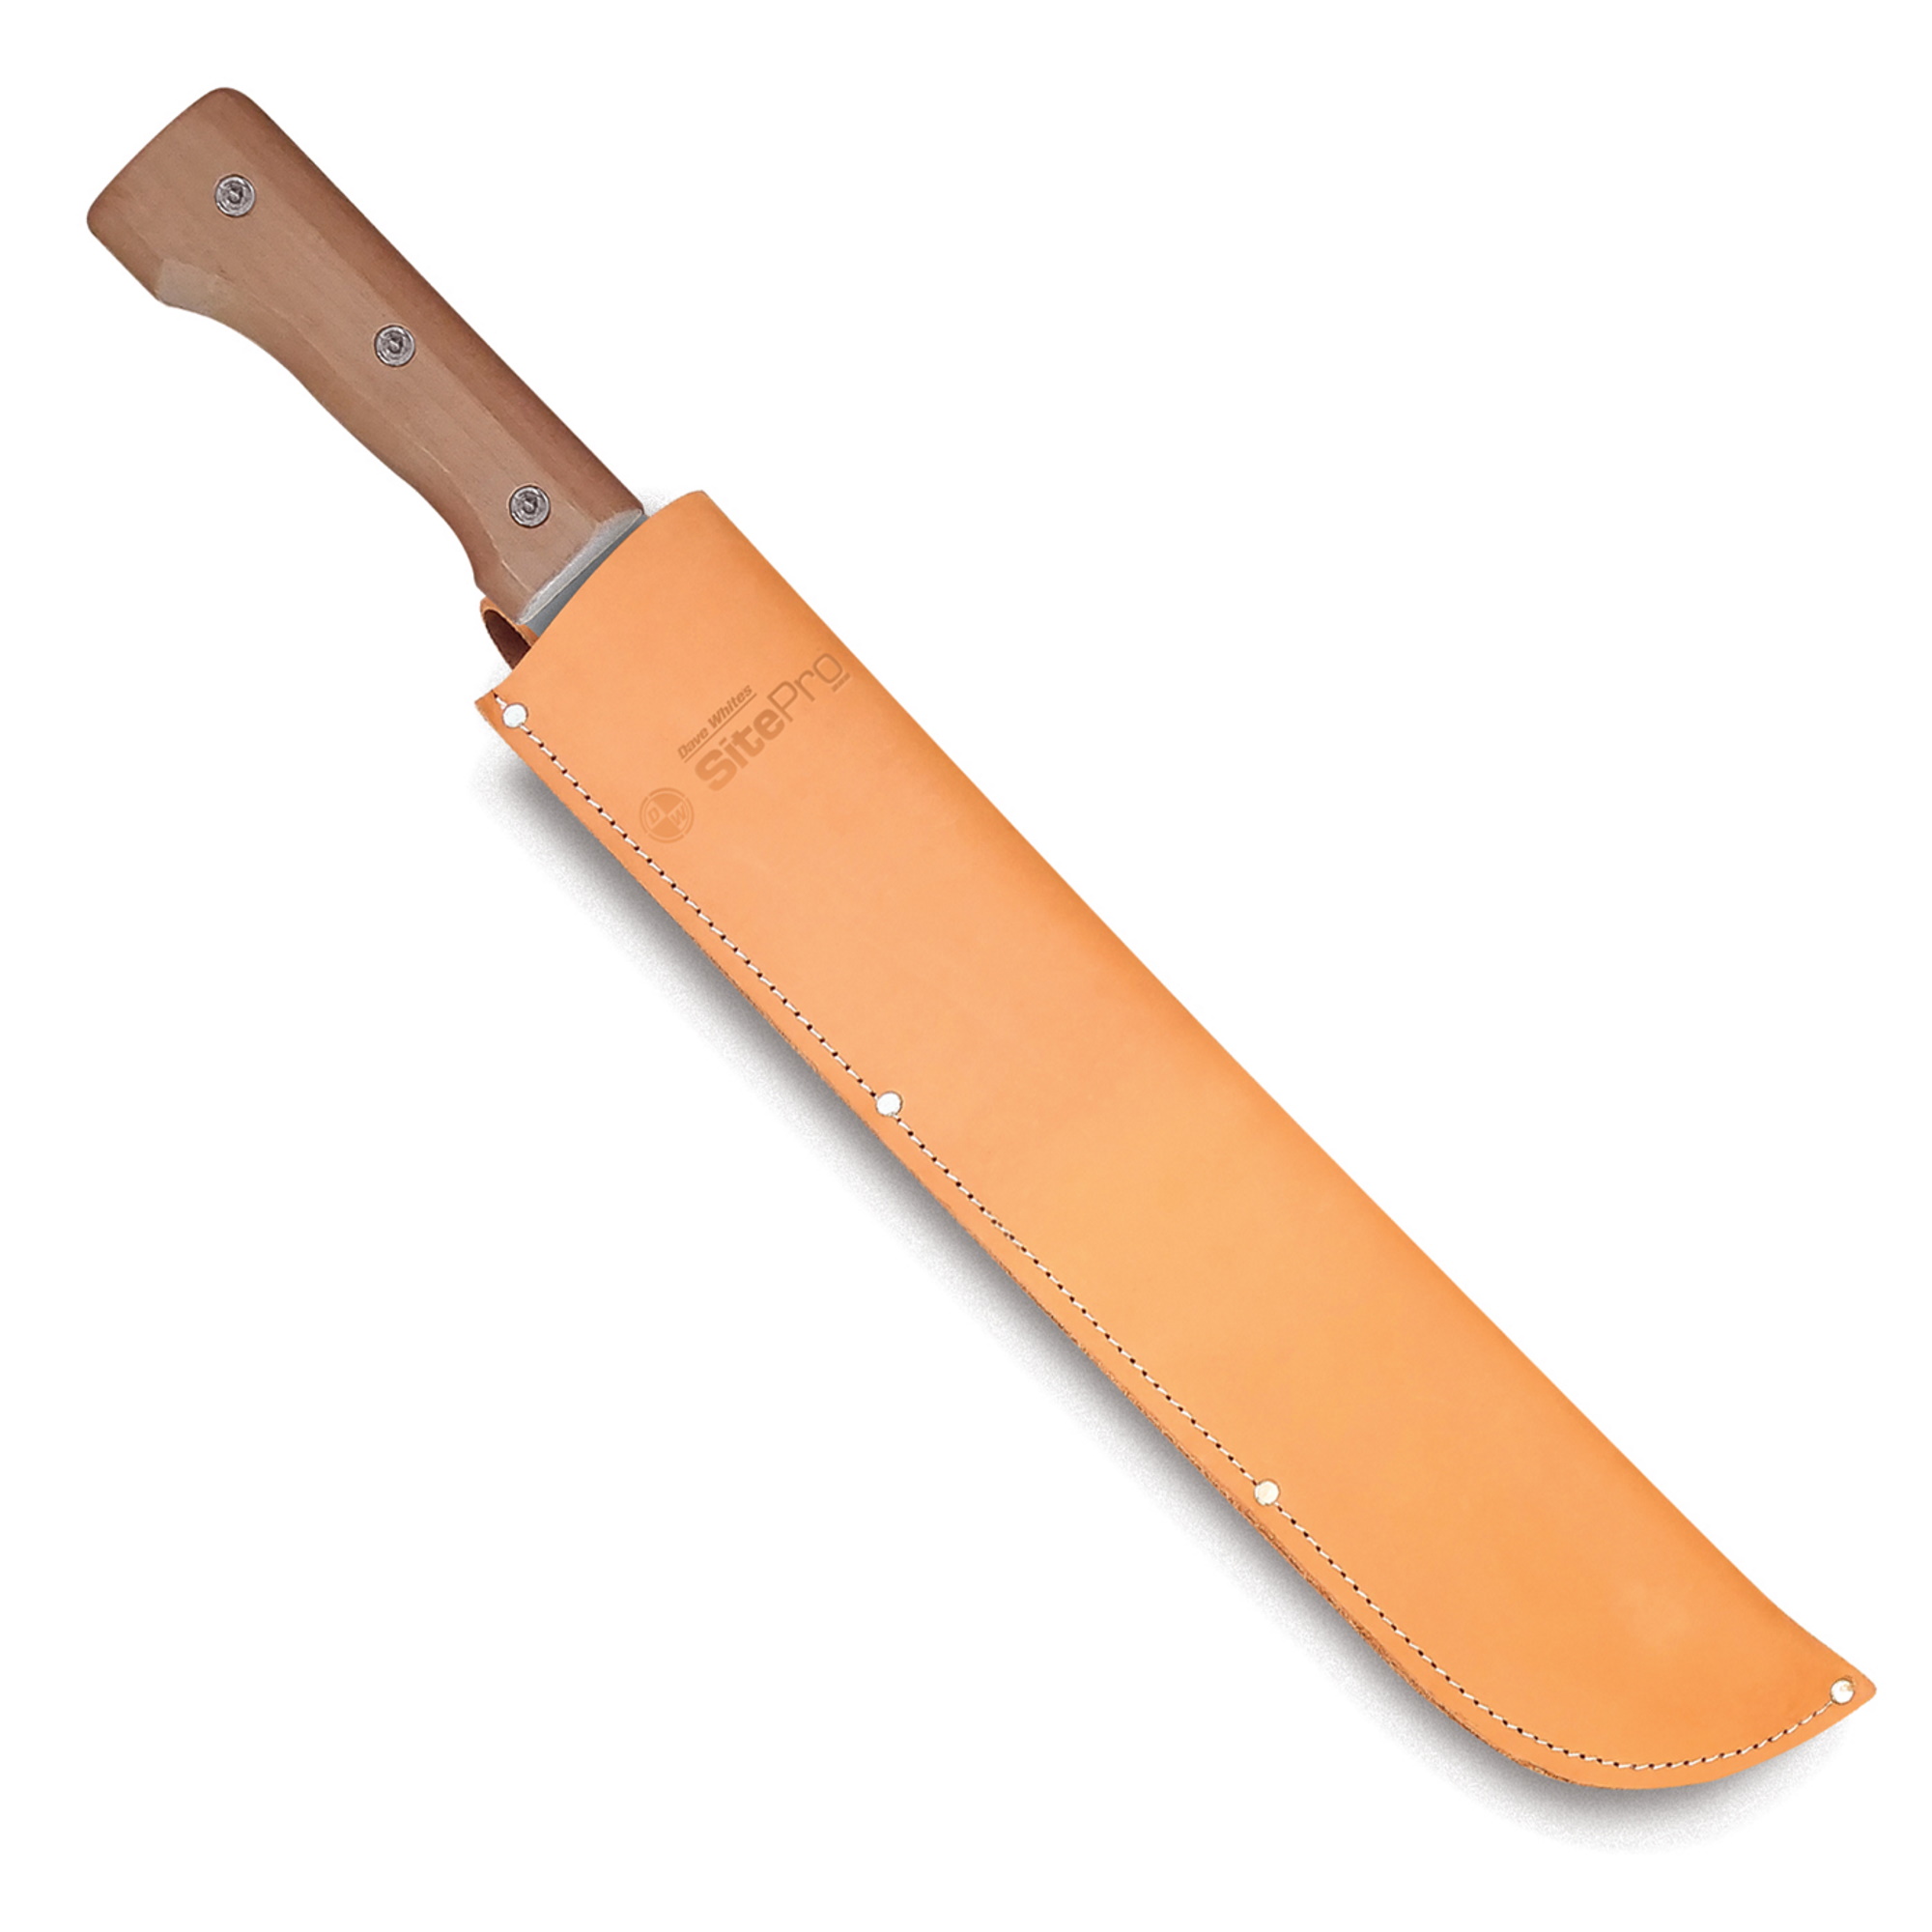 Pastry Knife Simón PRO Forjado with leather sheath and cut rustic